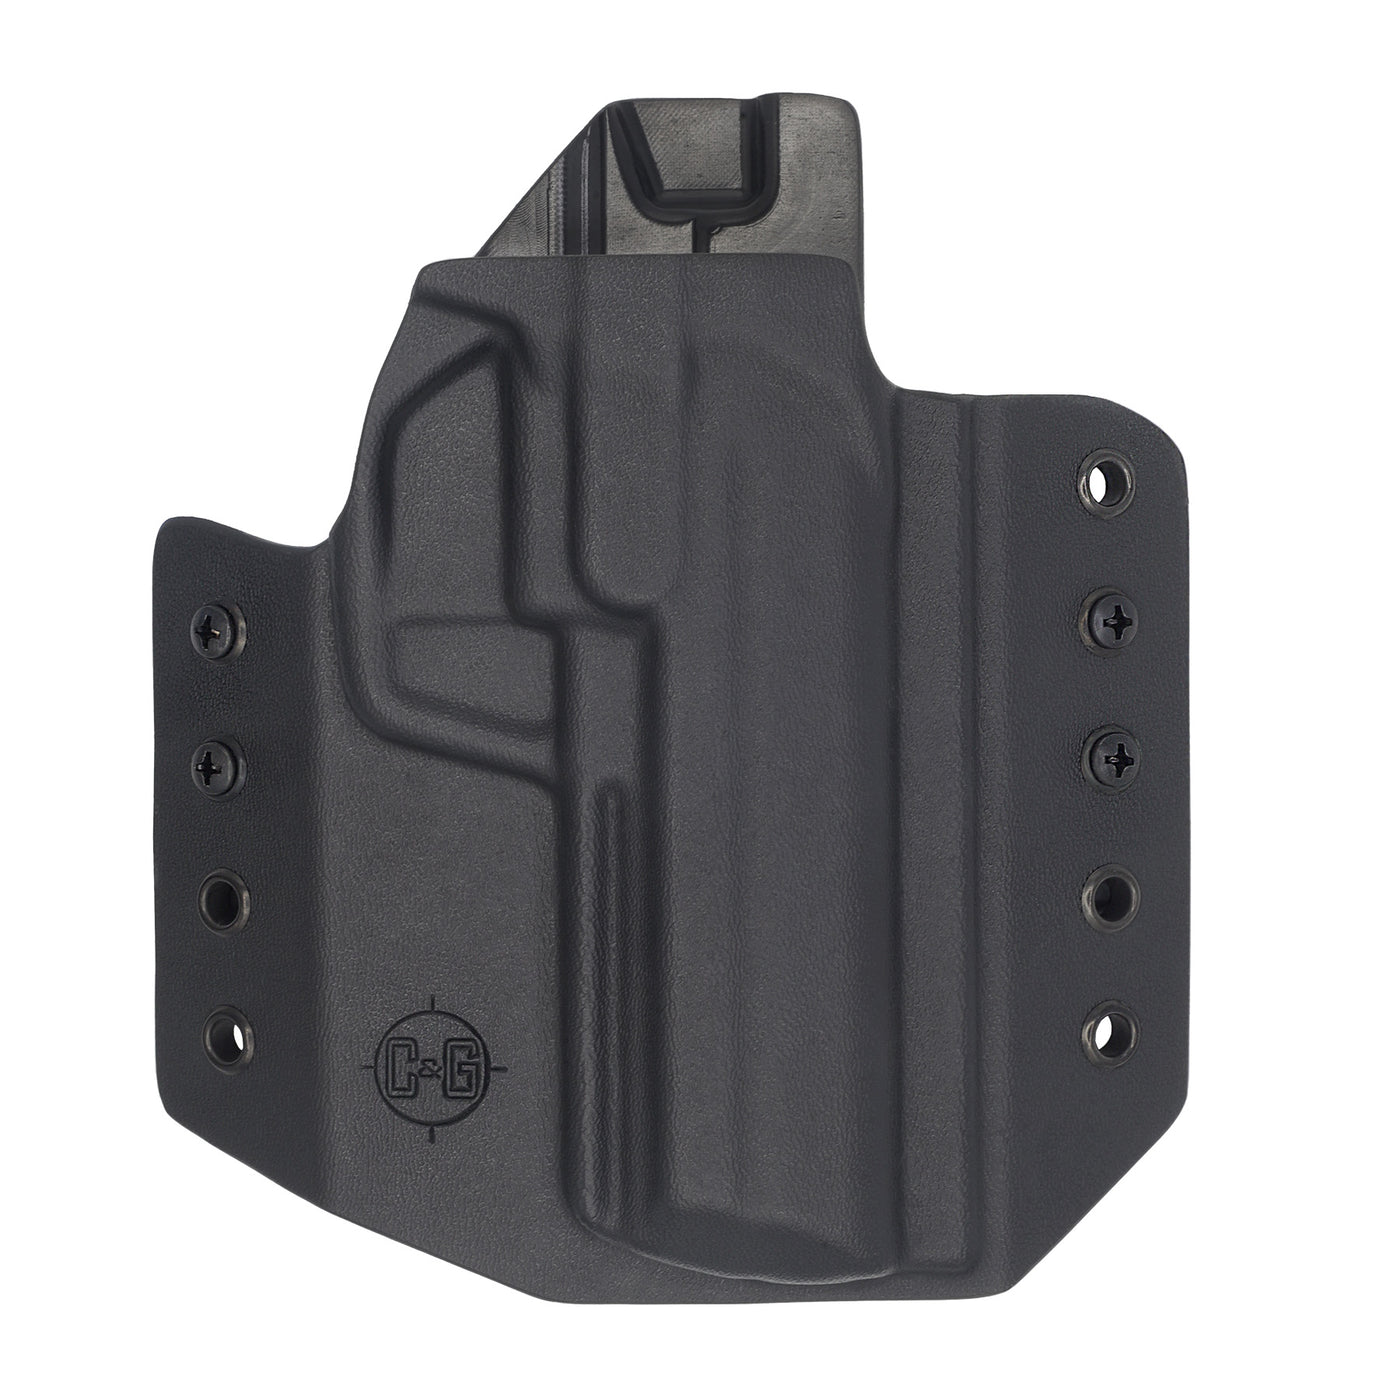 This is a quickship C&G Holsters OWB Outside the waistband Holster for the Heckler and Koch HK45c.